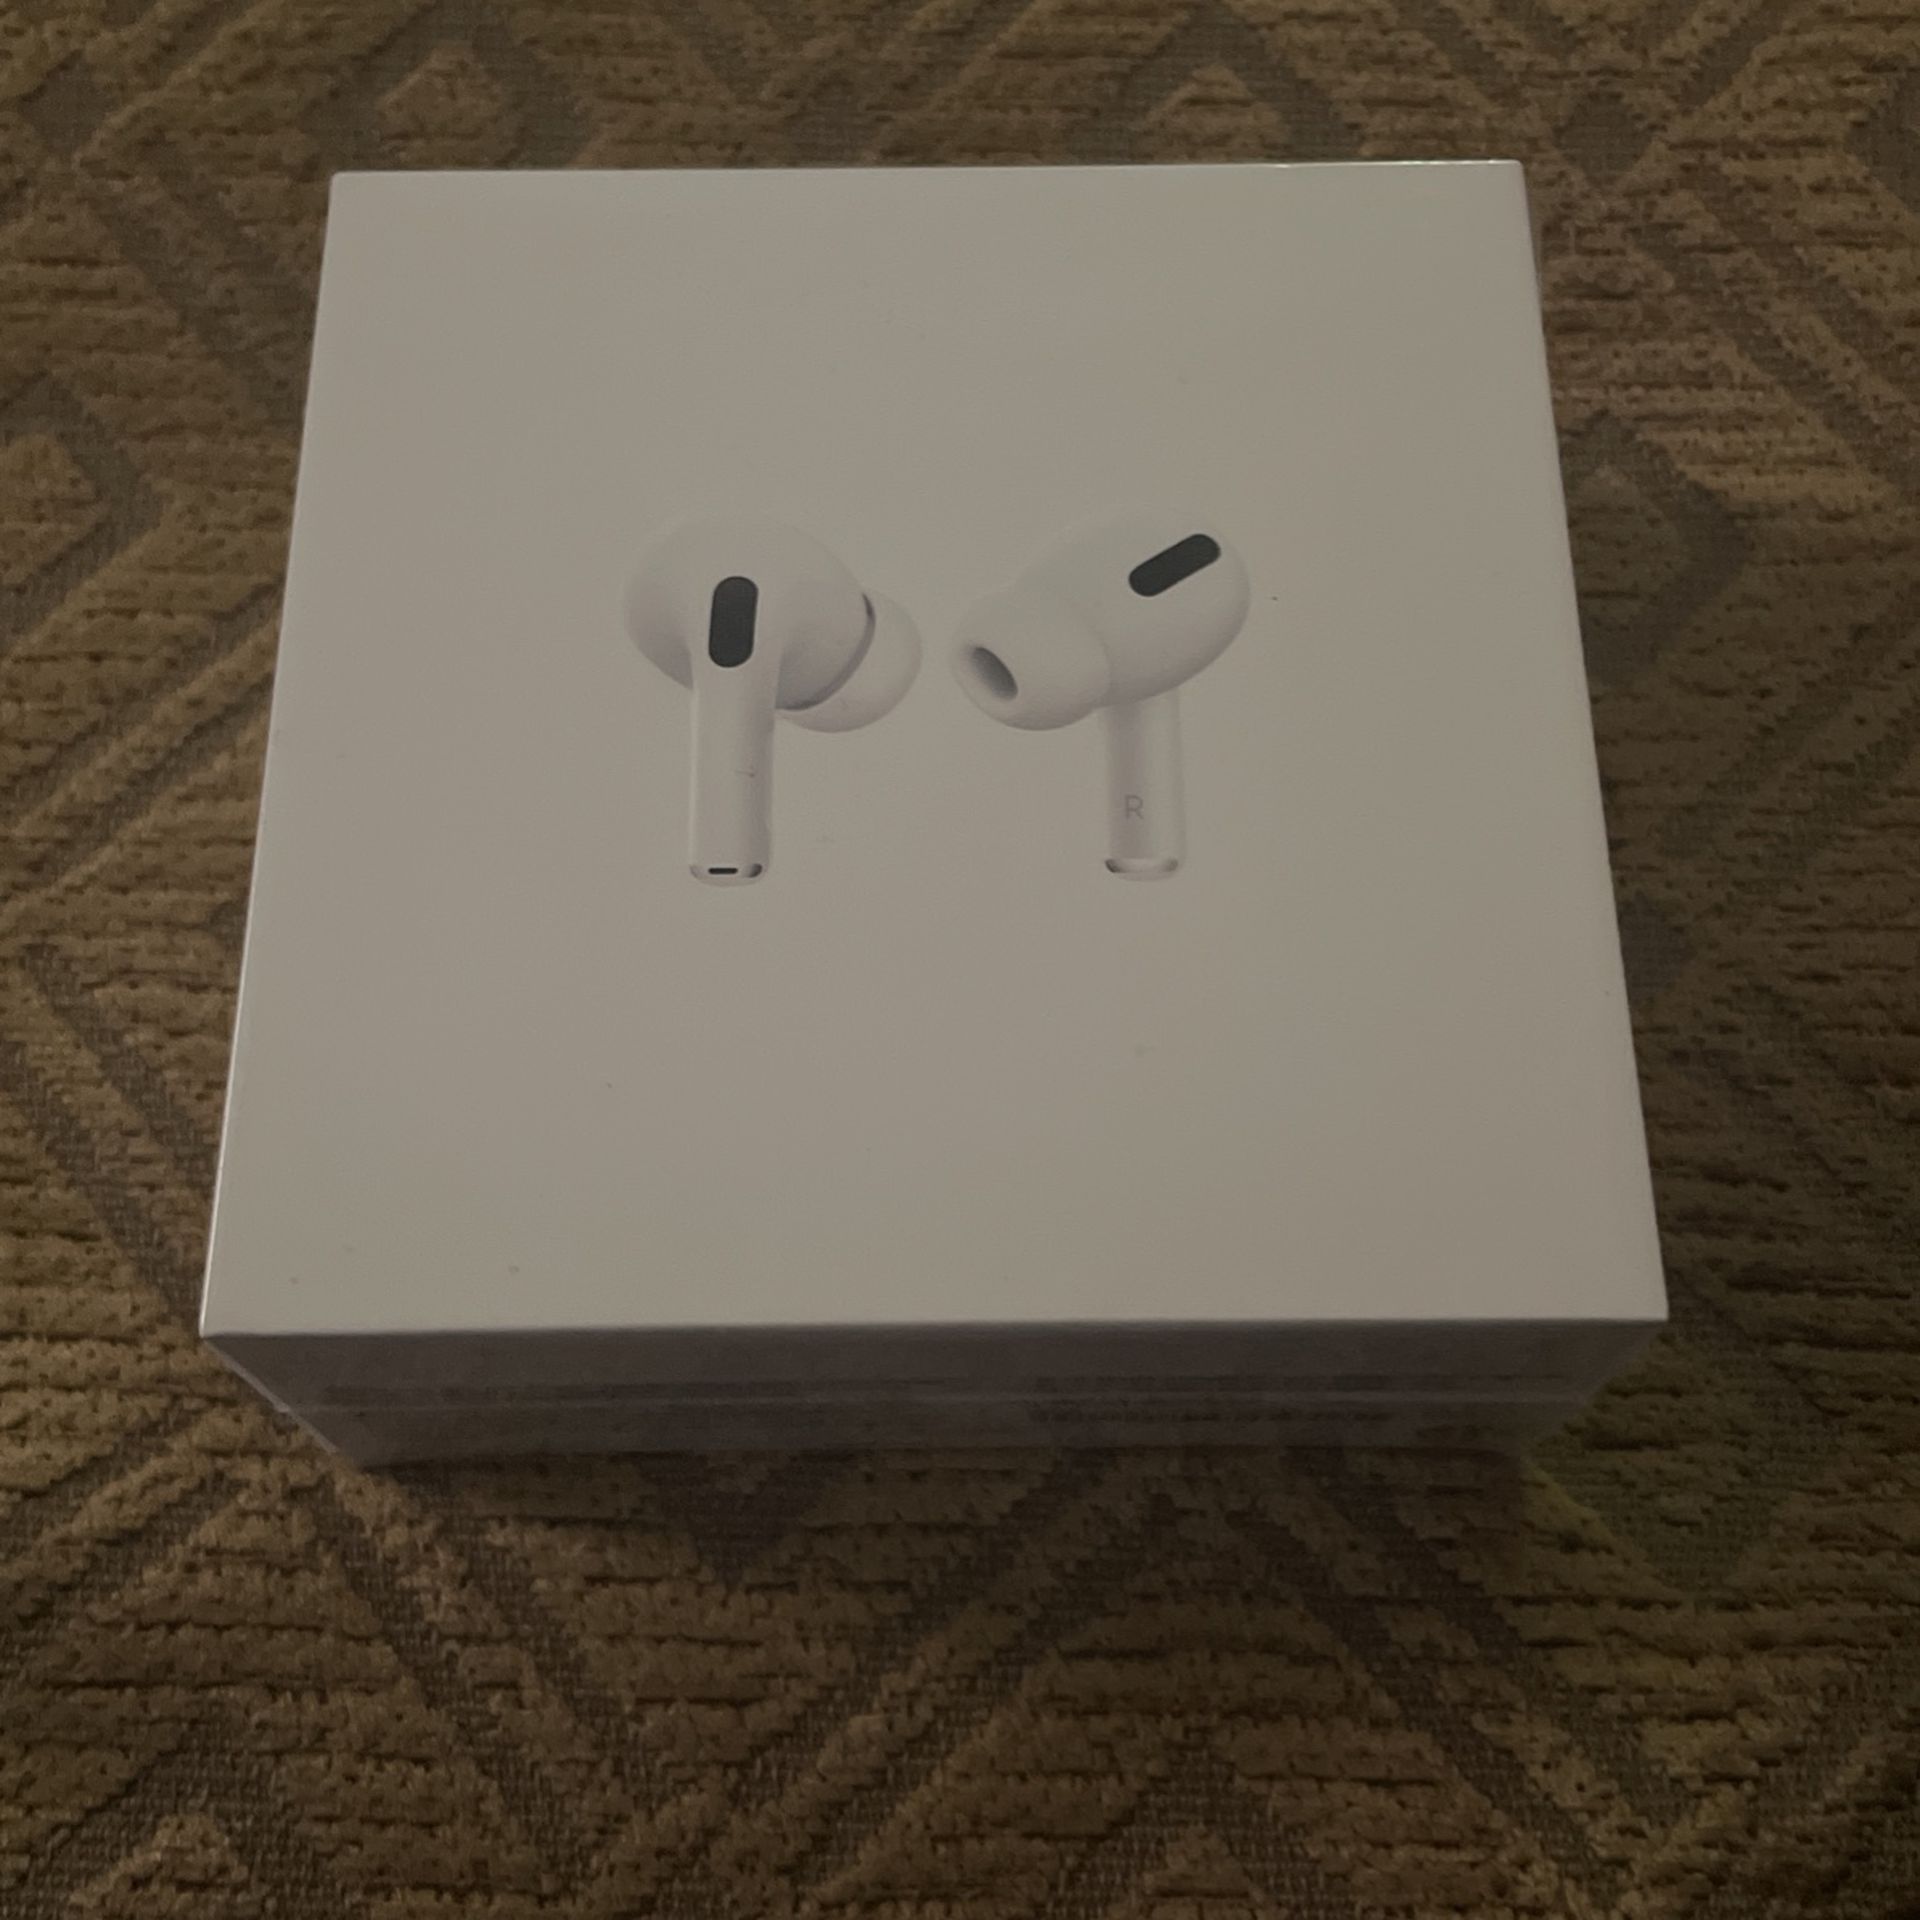 SEALED Airpods Pro (NEWEST VERSION)